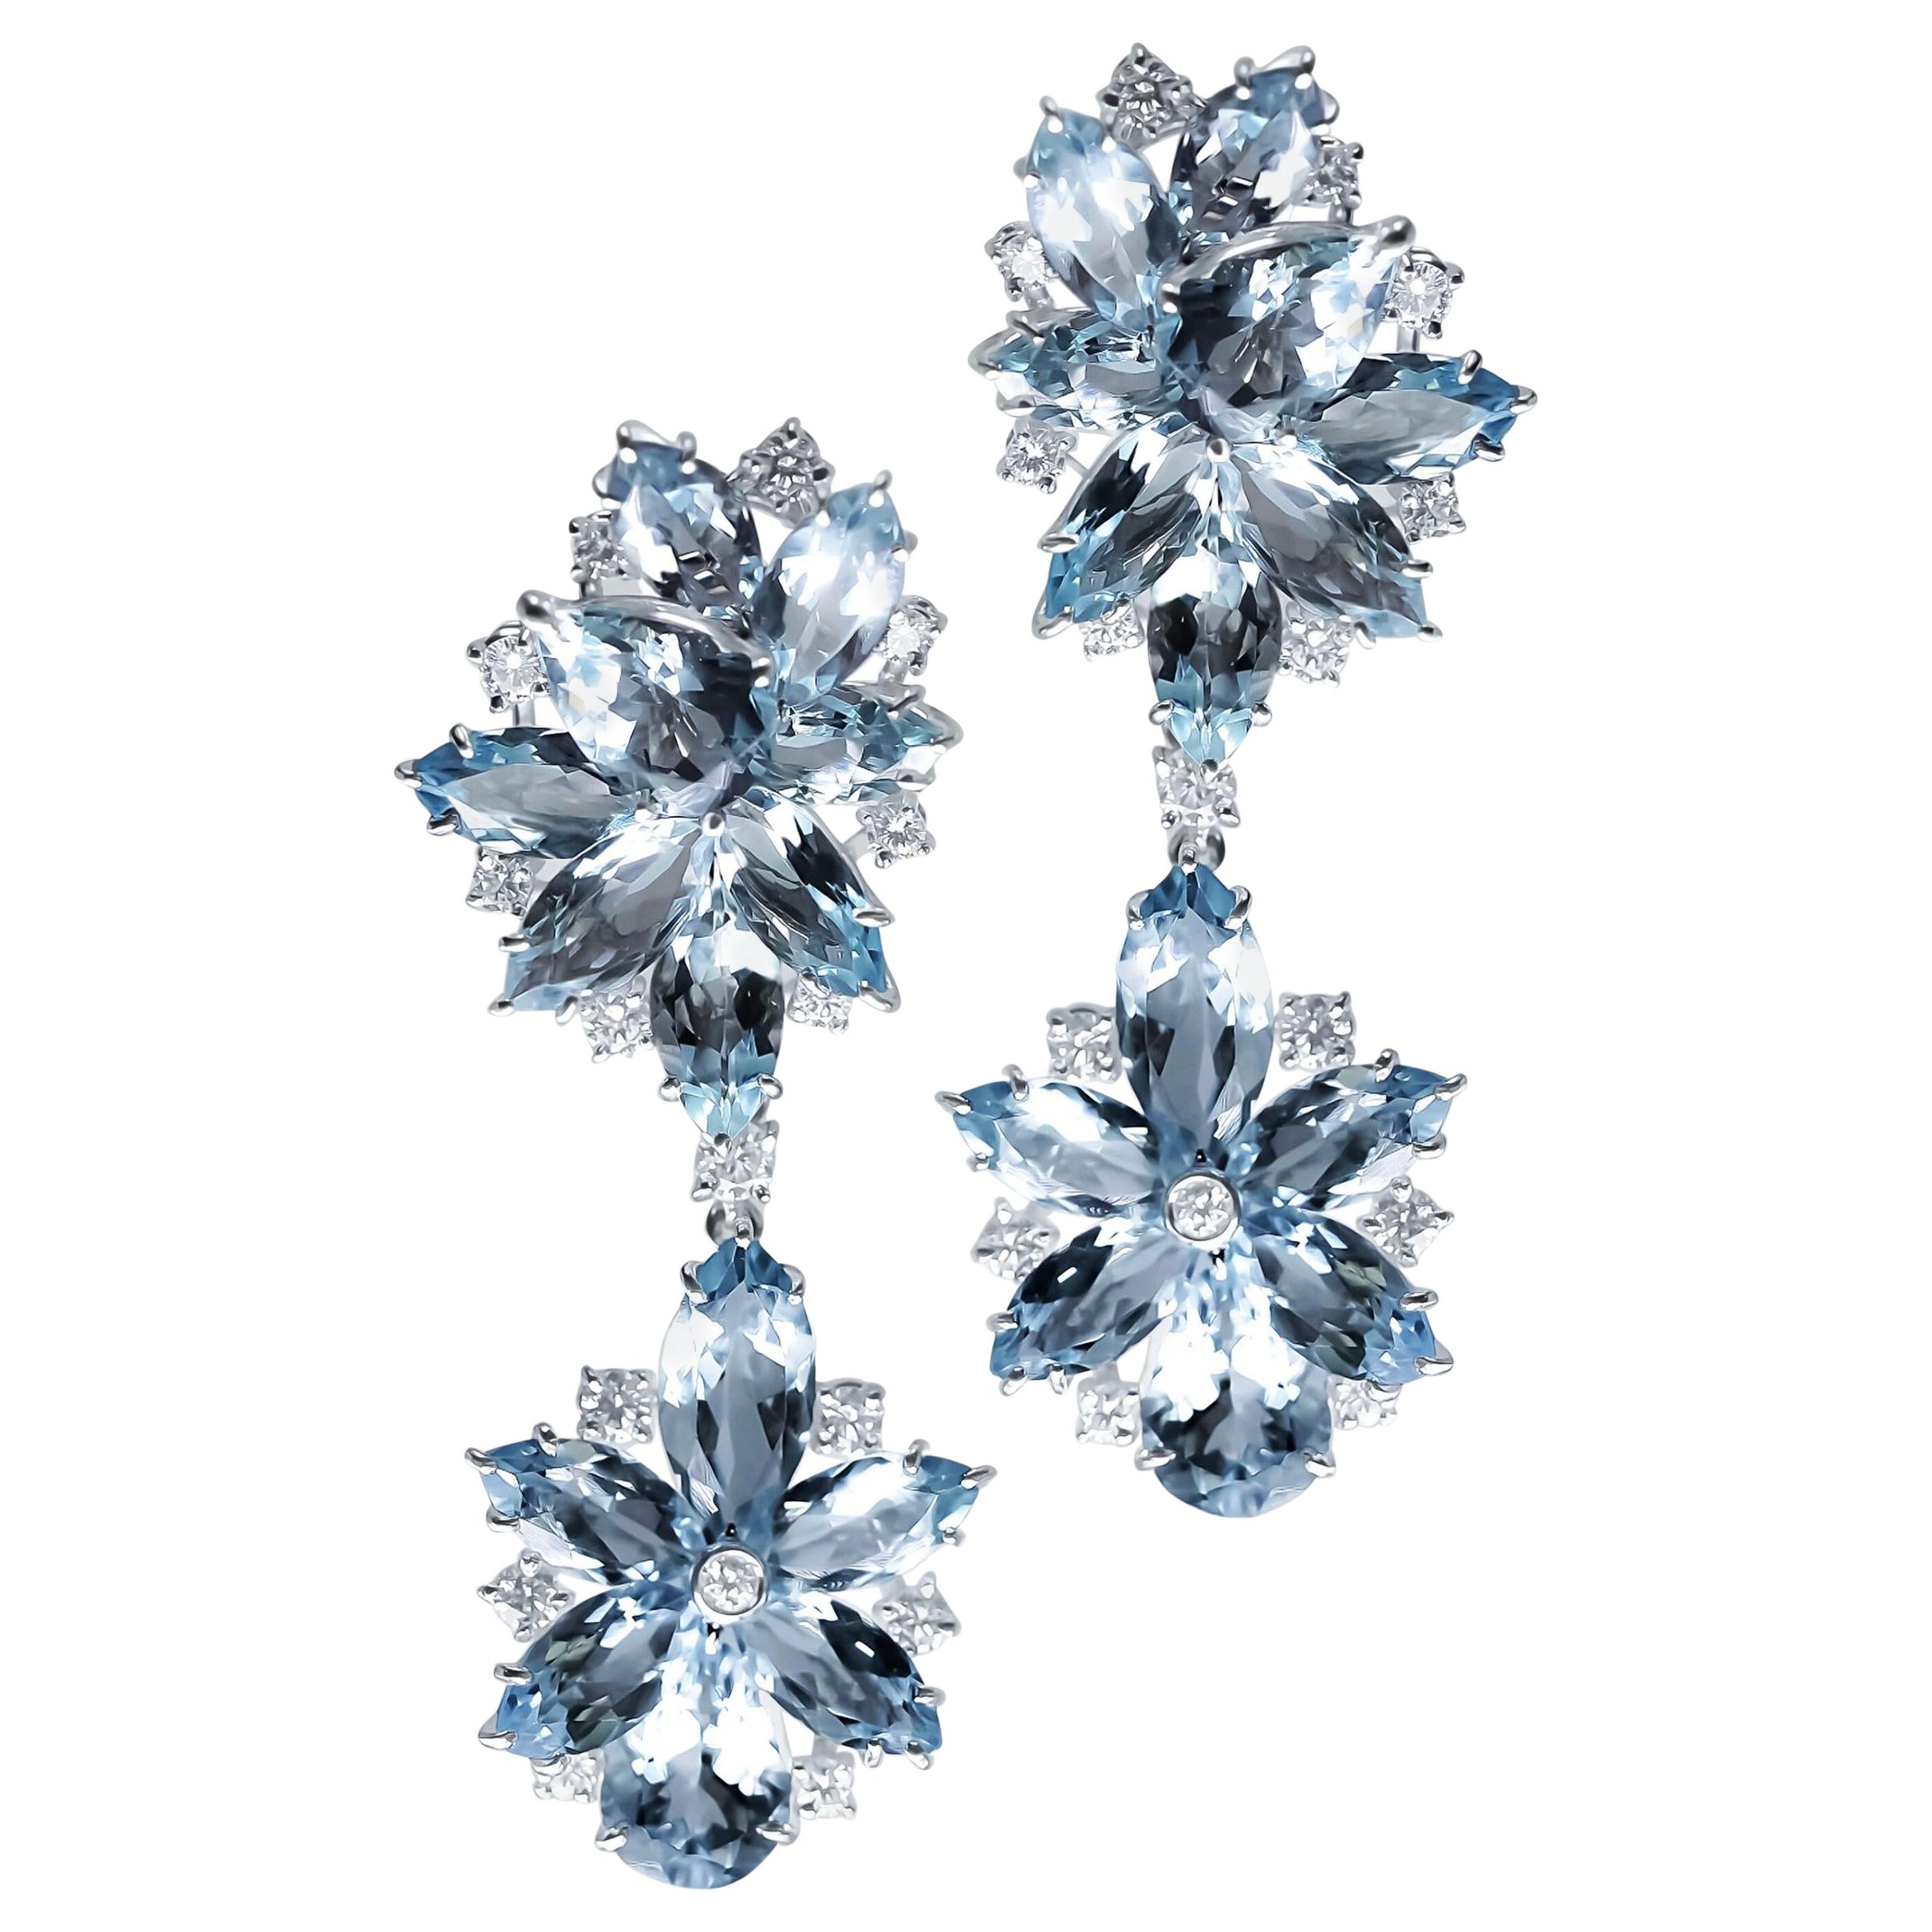 Gorgeous 18 Karat White Gold Earrings with Natural Aquamarines and Diamonds